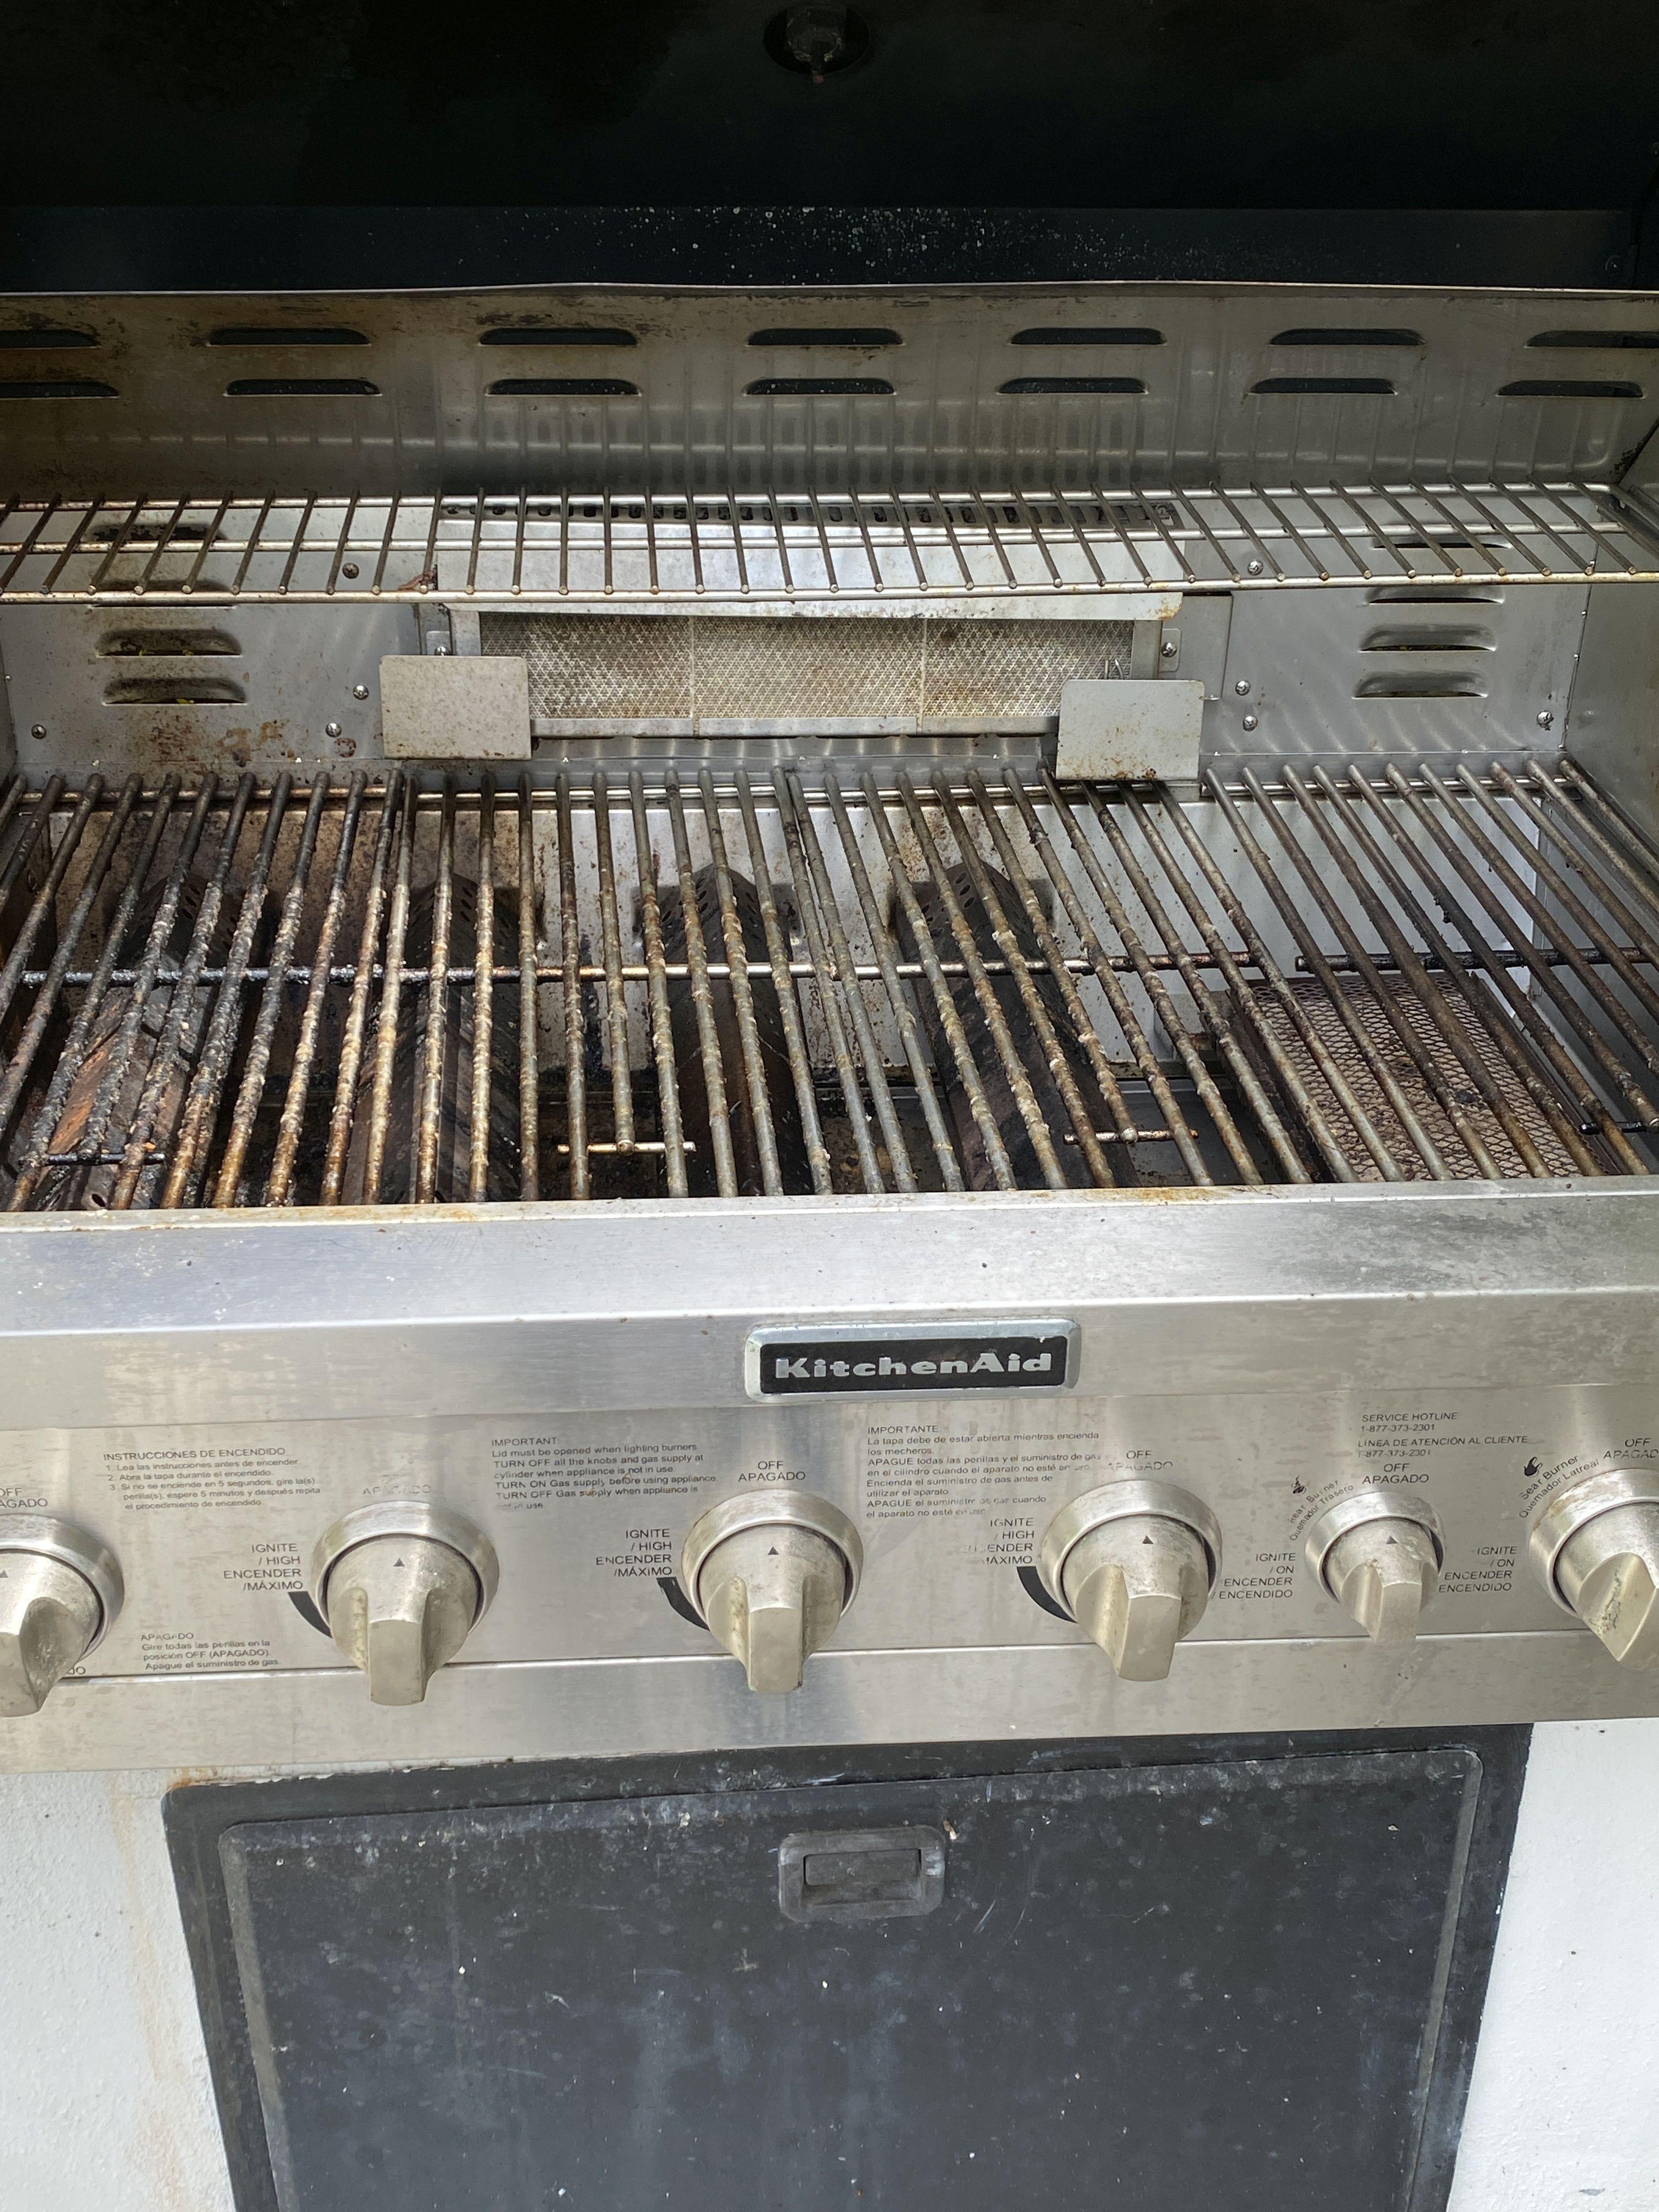 Kitchenaid 36" Drop In Propane BBQ. All Stainless Steel With A 7' x 48" Granite Counter System And A